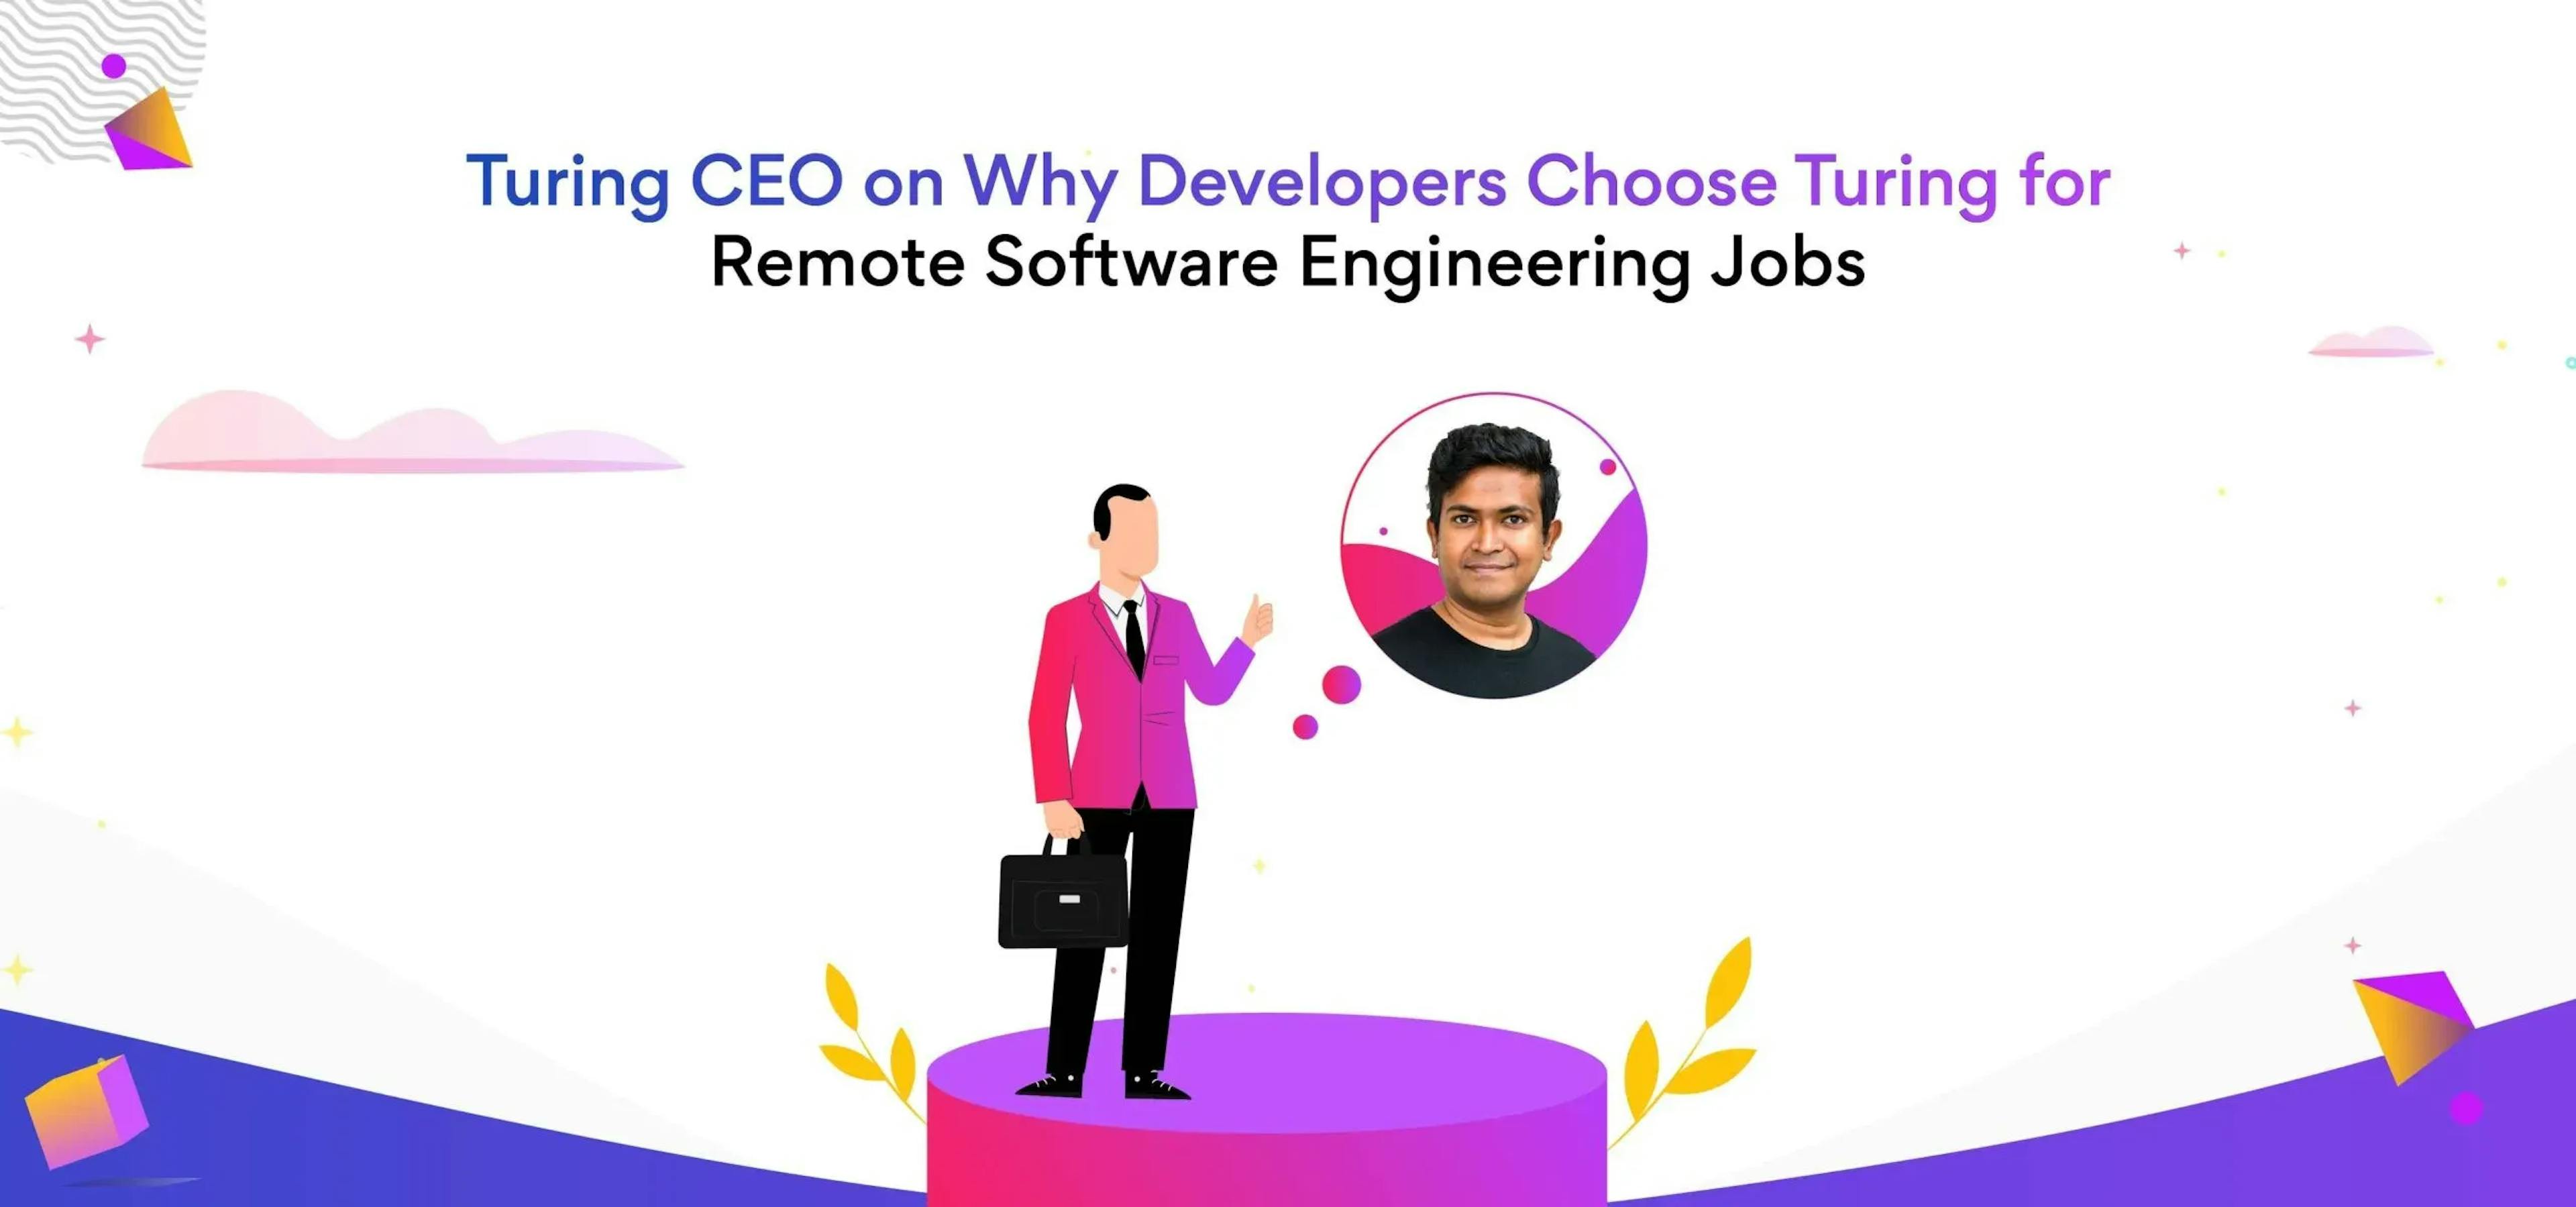 Turing CEO on Why Developers Choose Turing for Remote Software Engineering Jobs